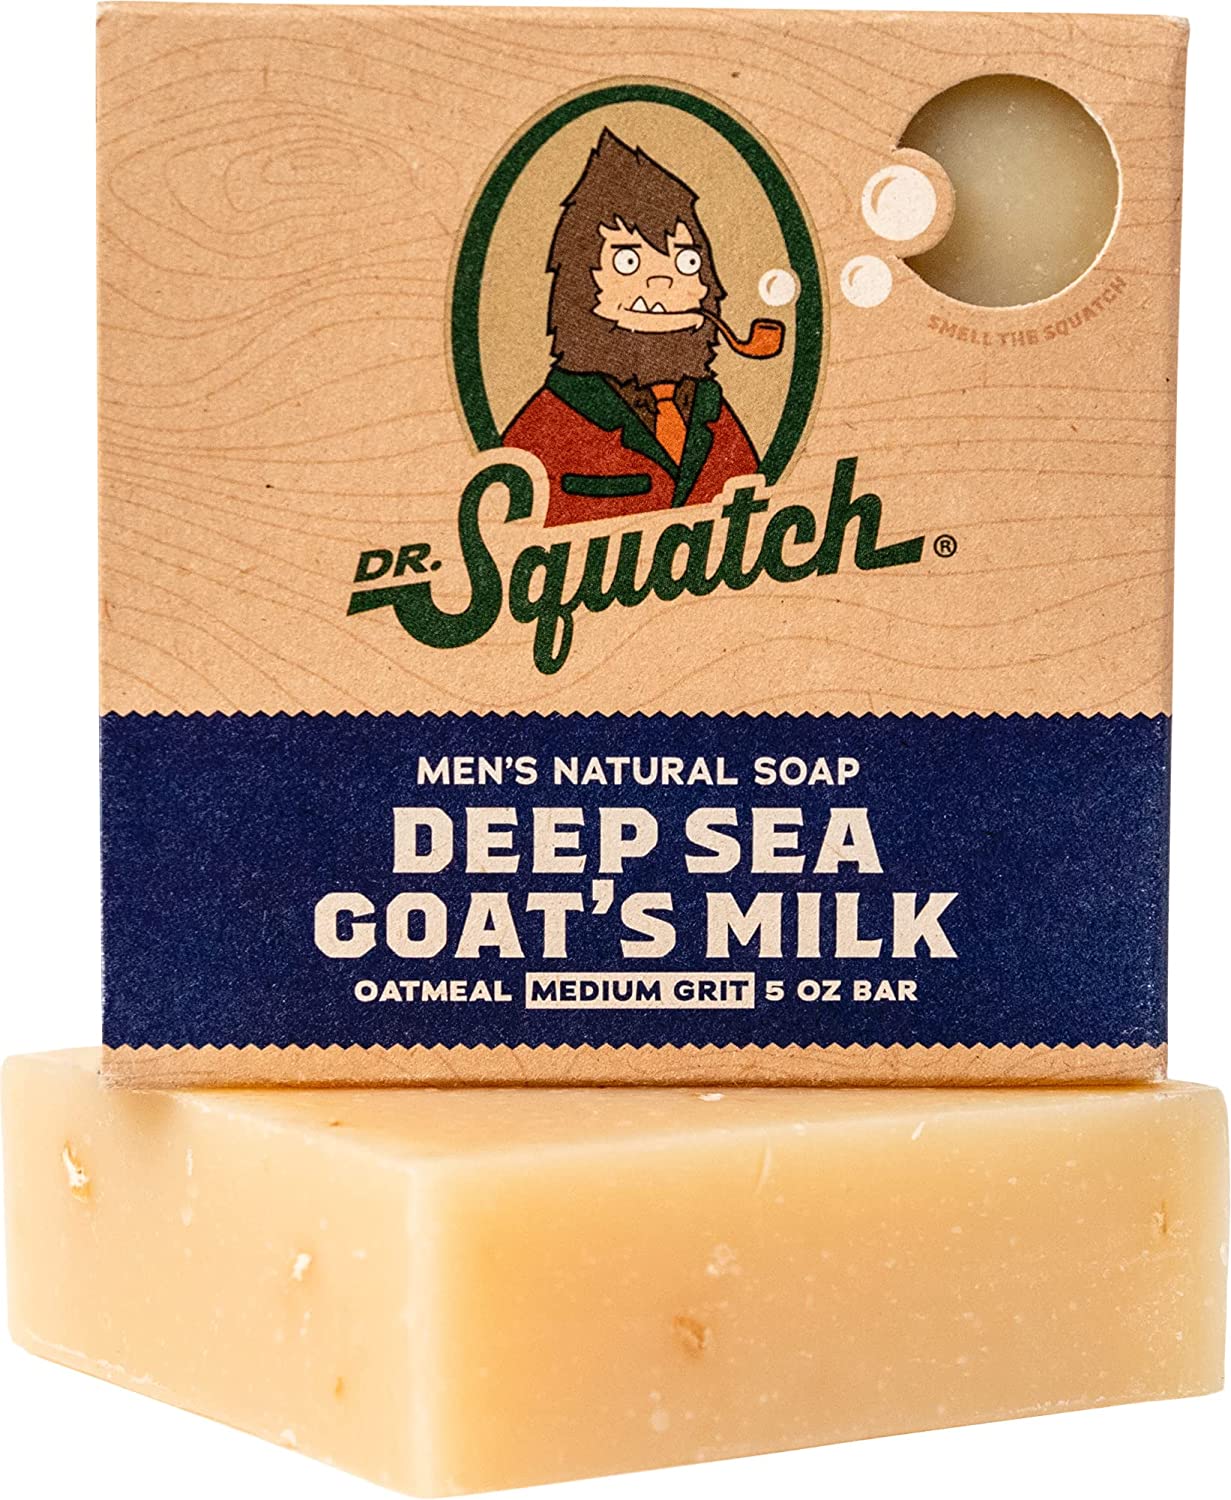 Dr. Squatch Pine Tar Bar Soap - Grooming Lounge